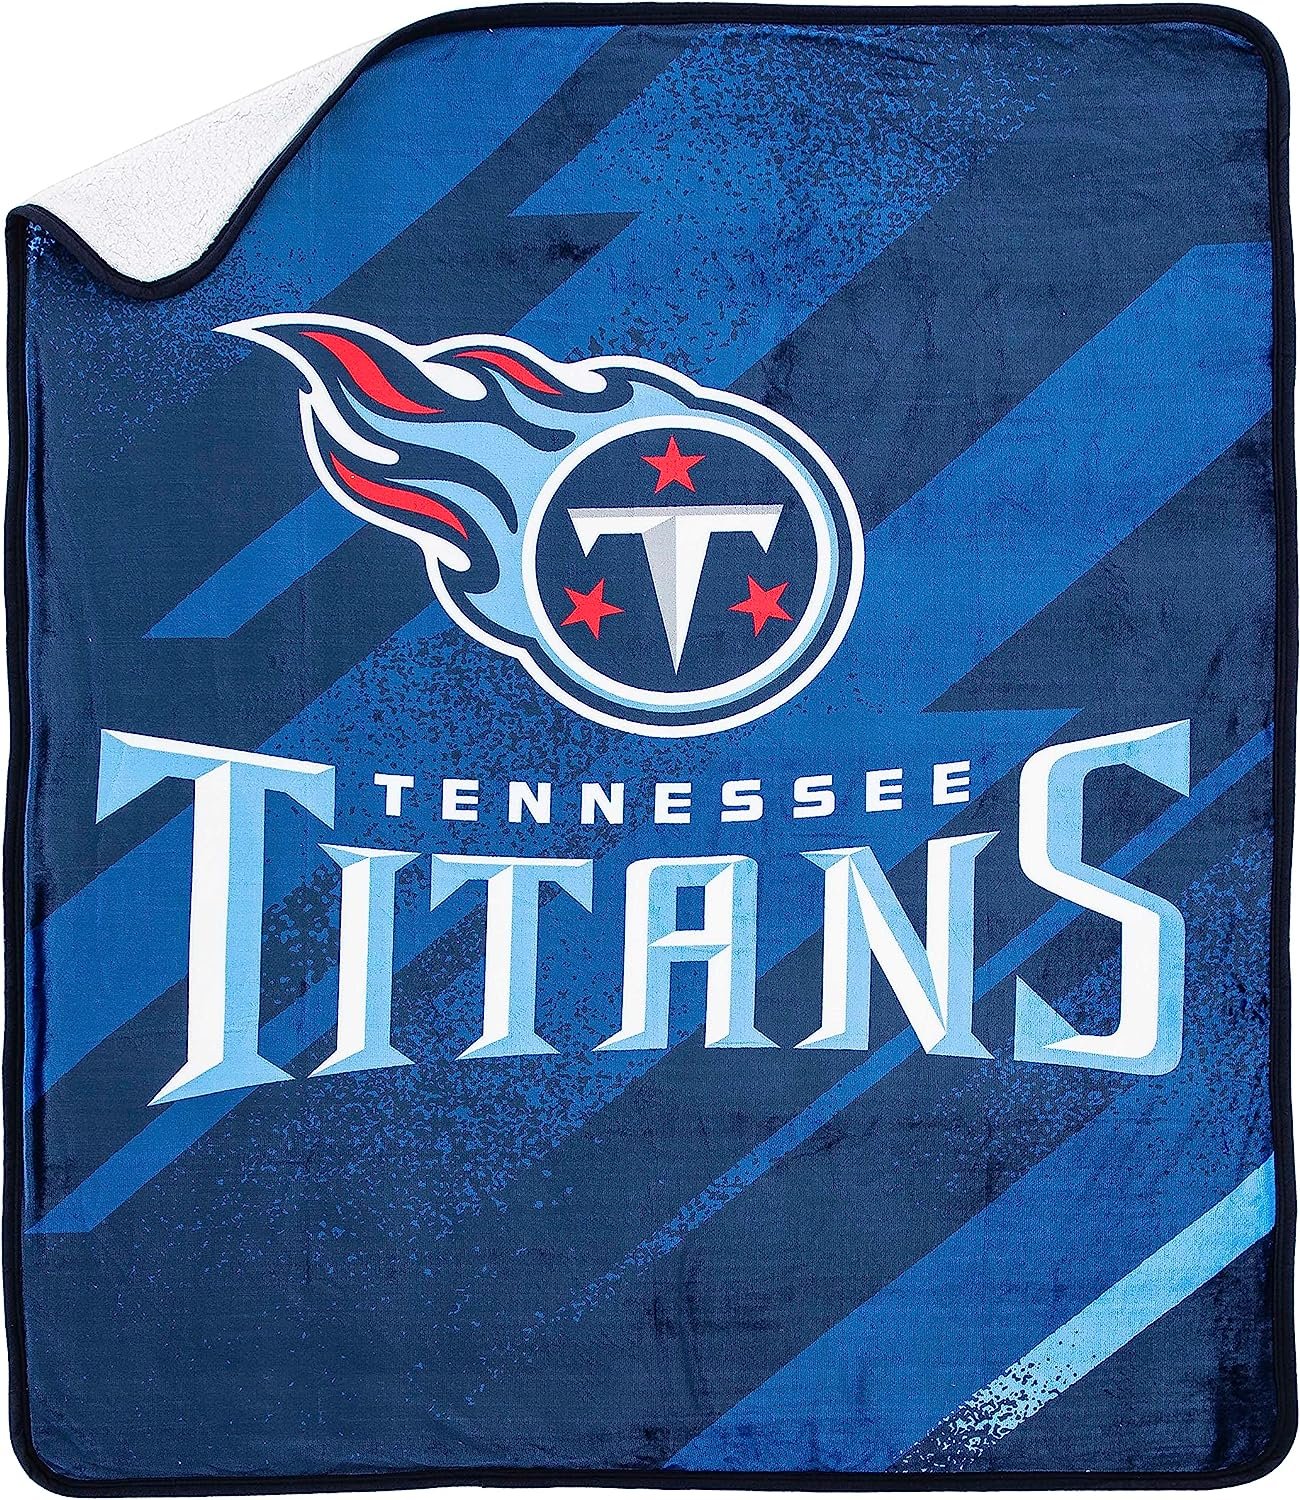 Tennessee Titans Throw Blanket, Sherpa Raschel Polyester, Silk Touch Style, Velocity Design, 50x60 Inch